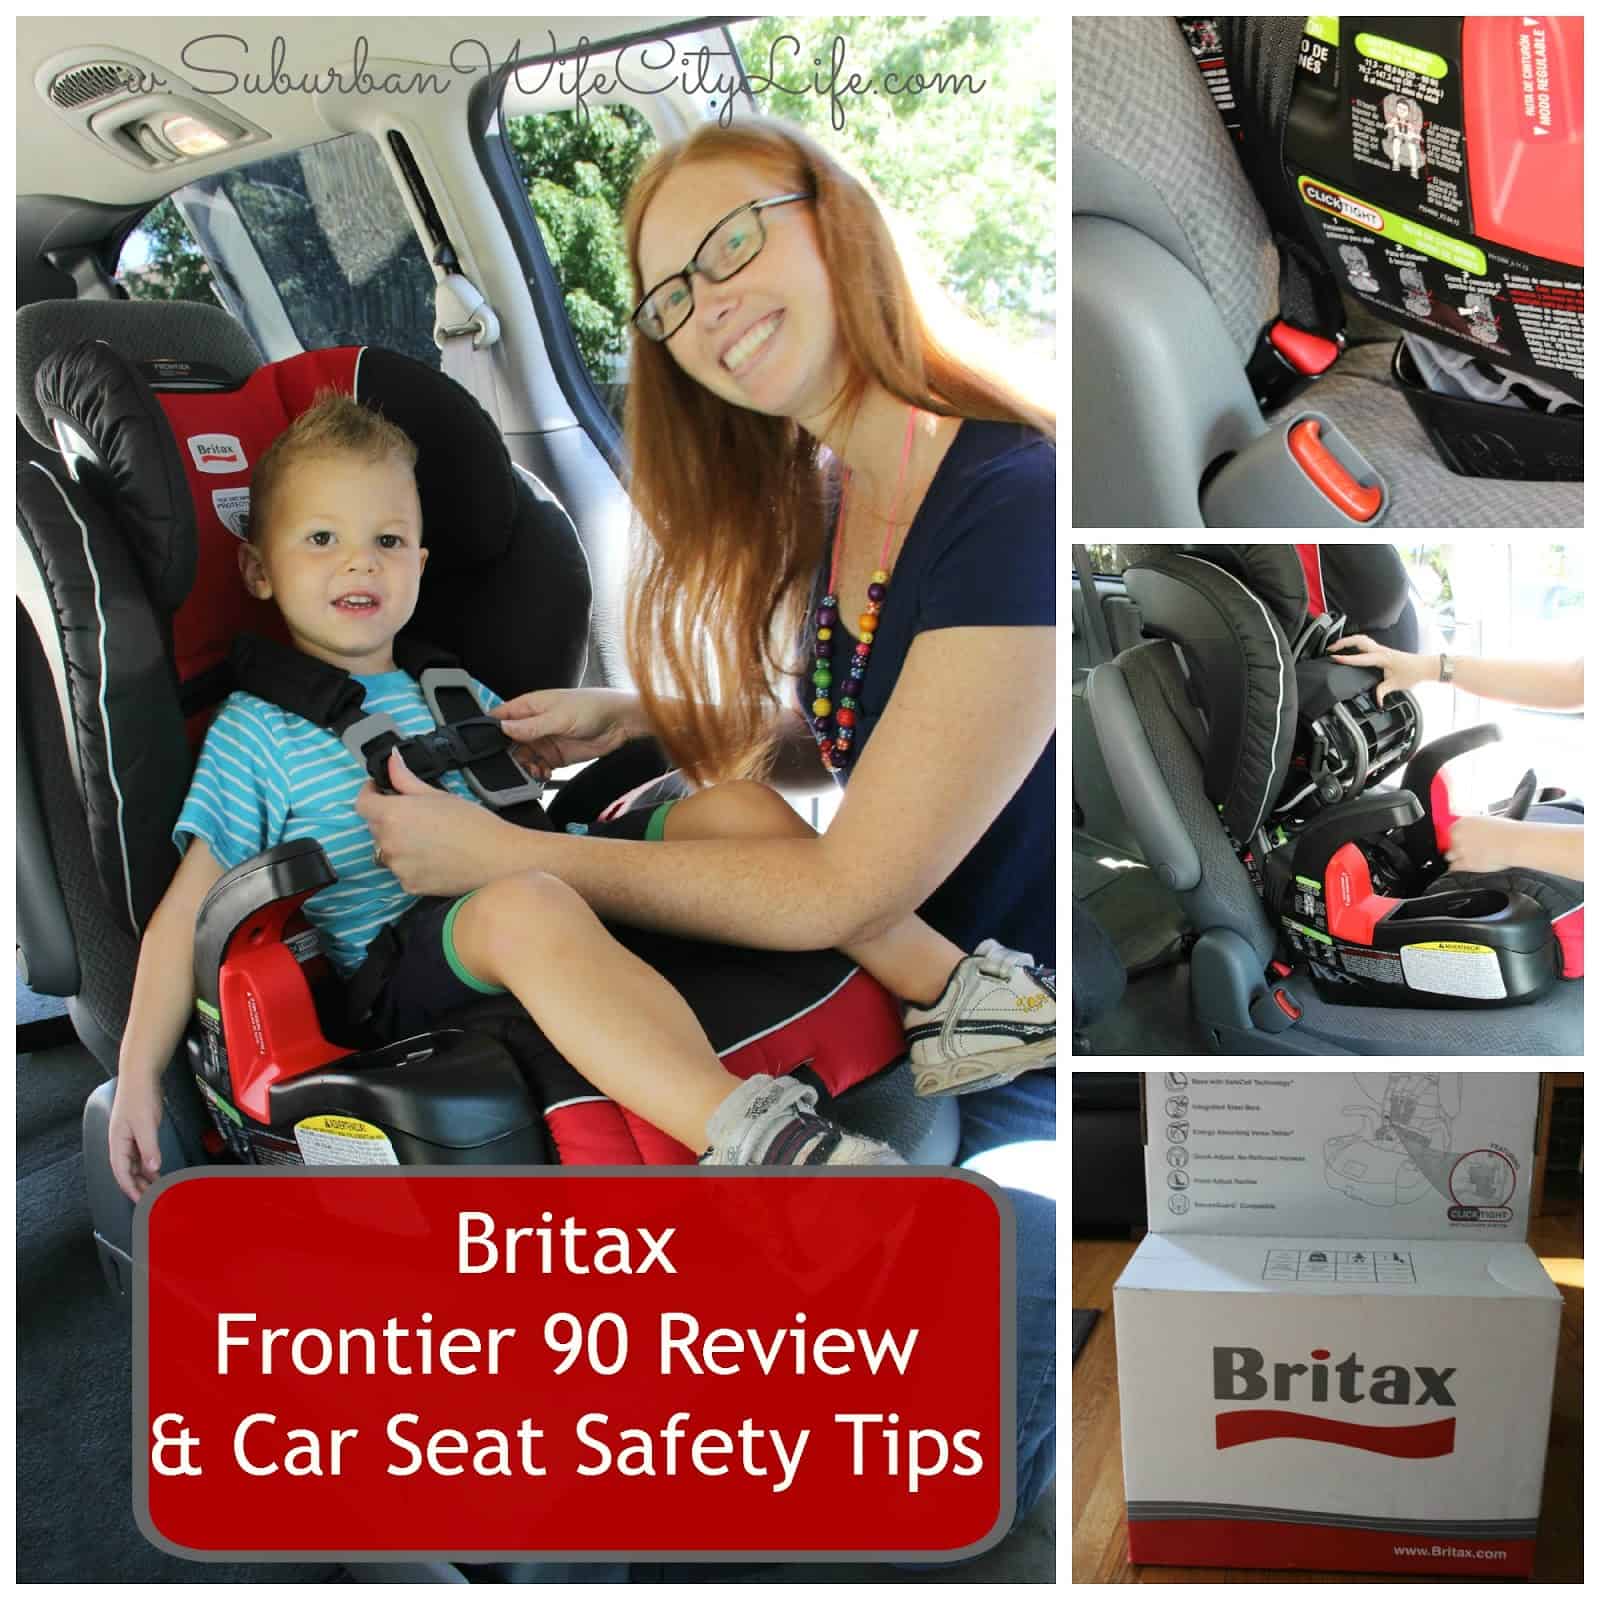 Car Seat Safety Info Britax Frontier, How To Tell If My Britax Car Seat Is Expired